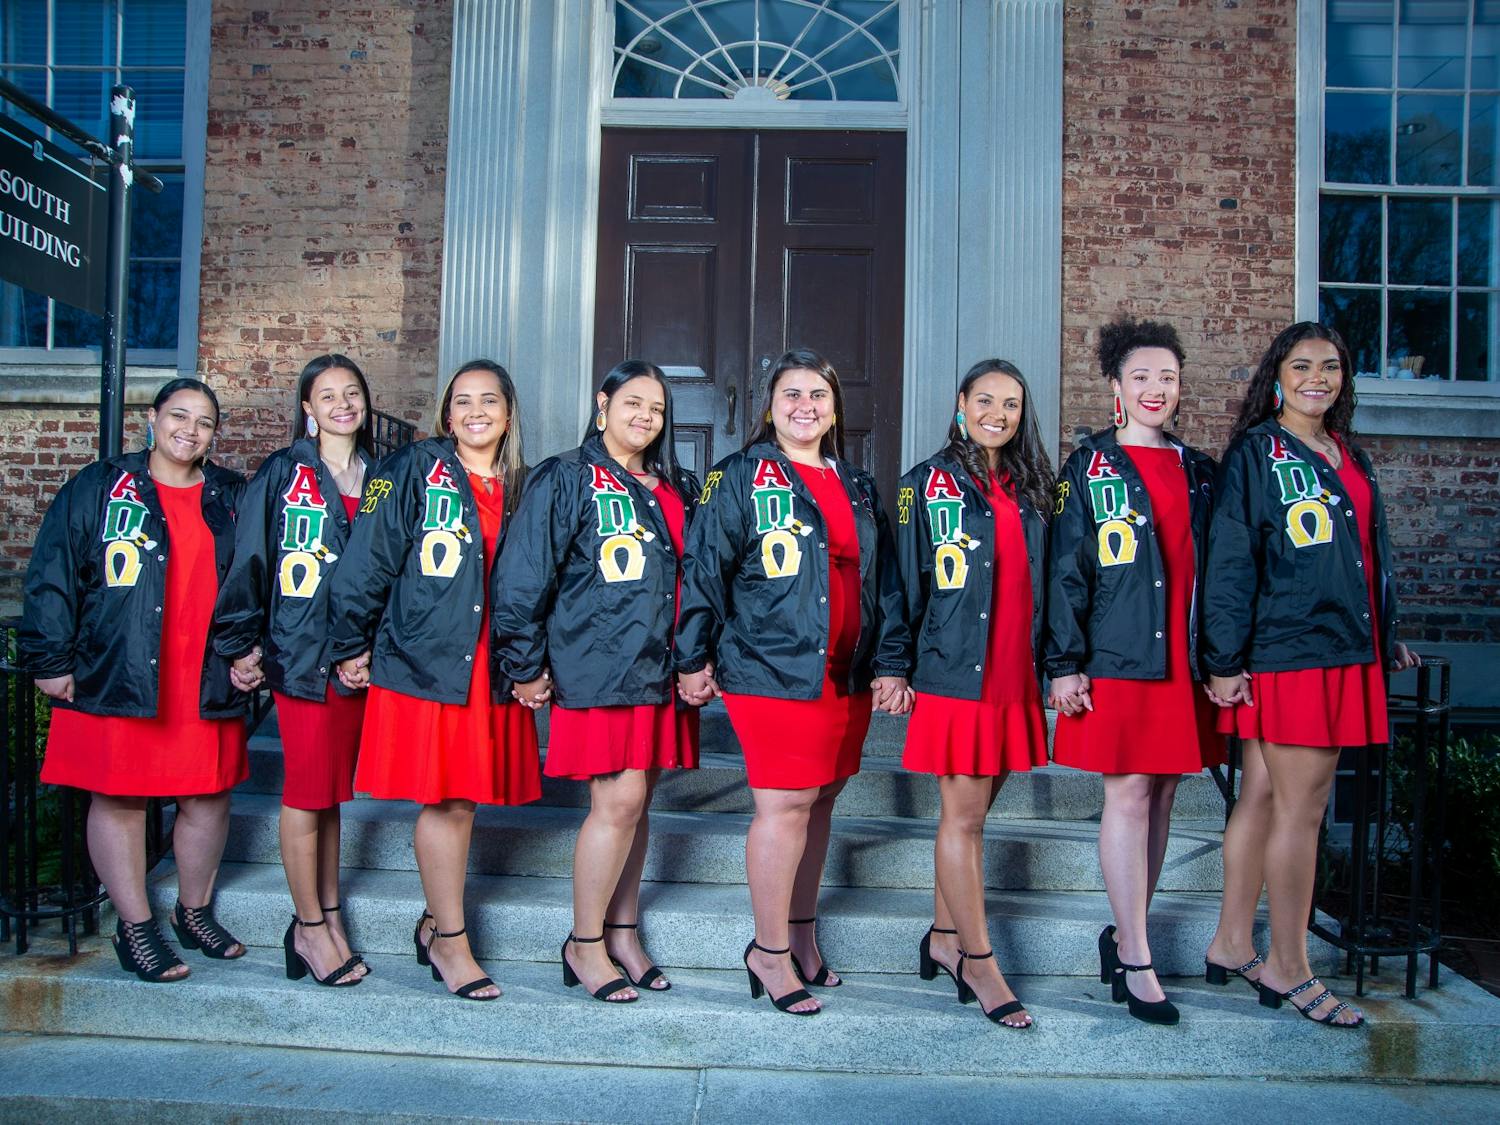 The Alpha Chapter of Alpha Pi Omega sorority is pictured.
Photo Courtesy of Ivan Richardson.